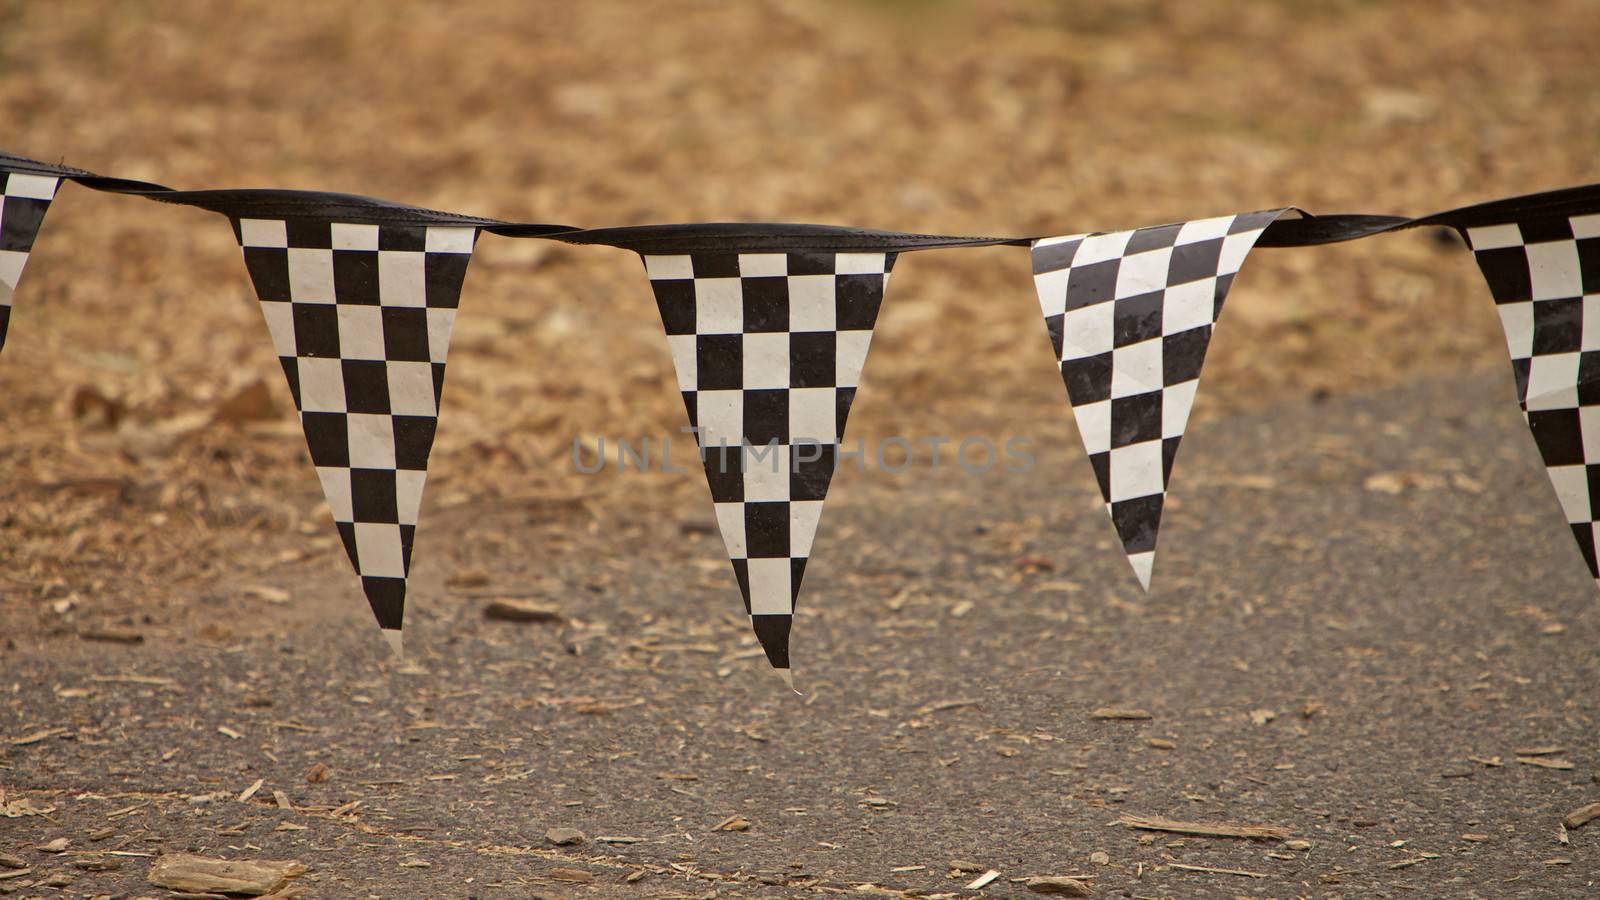 Racing flags in a race and fast cars